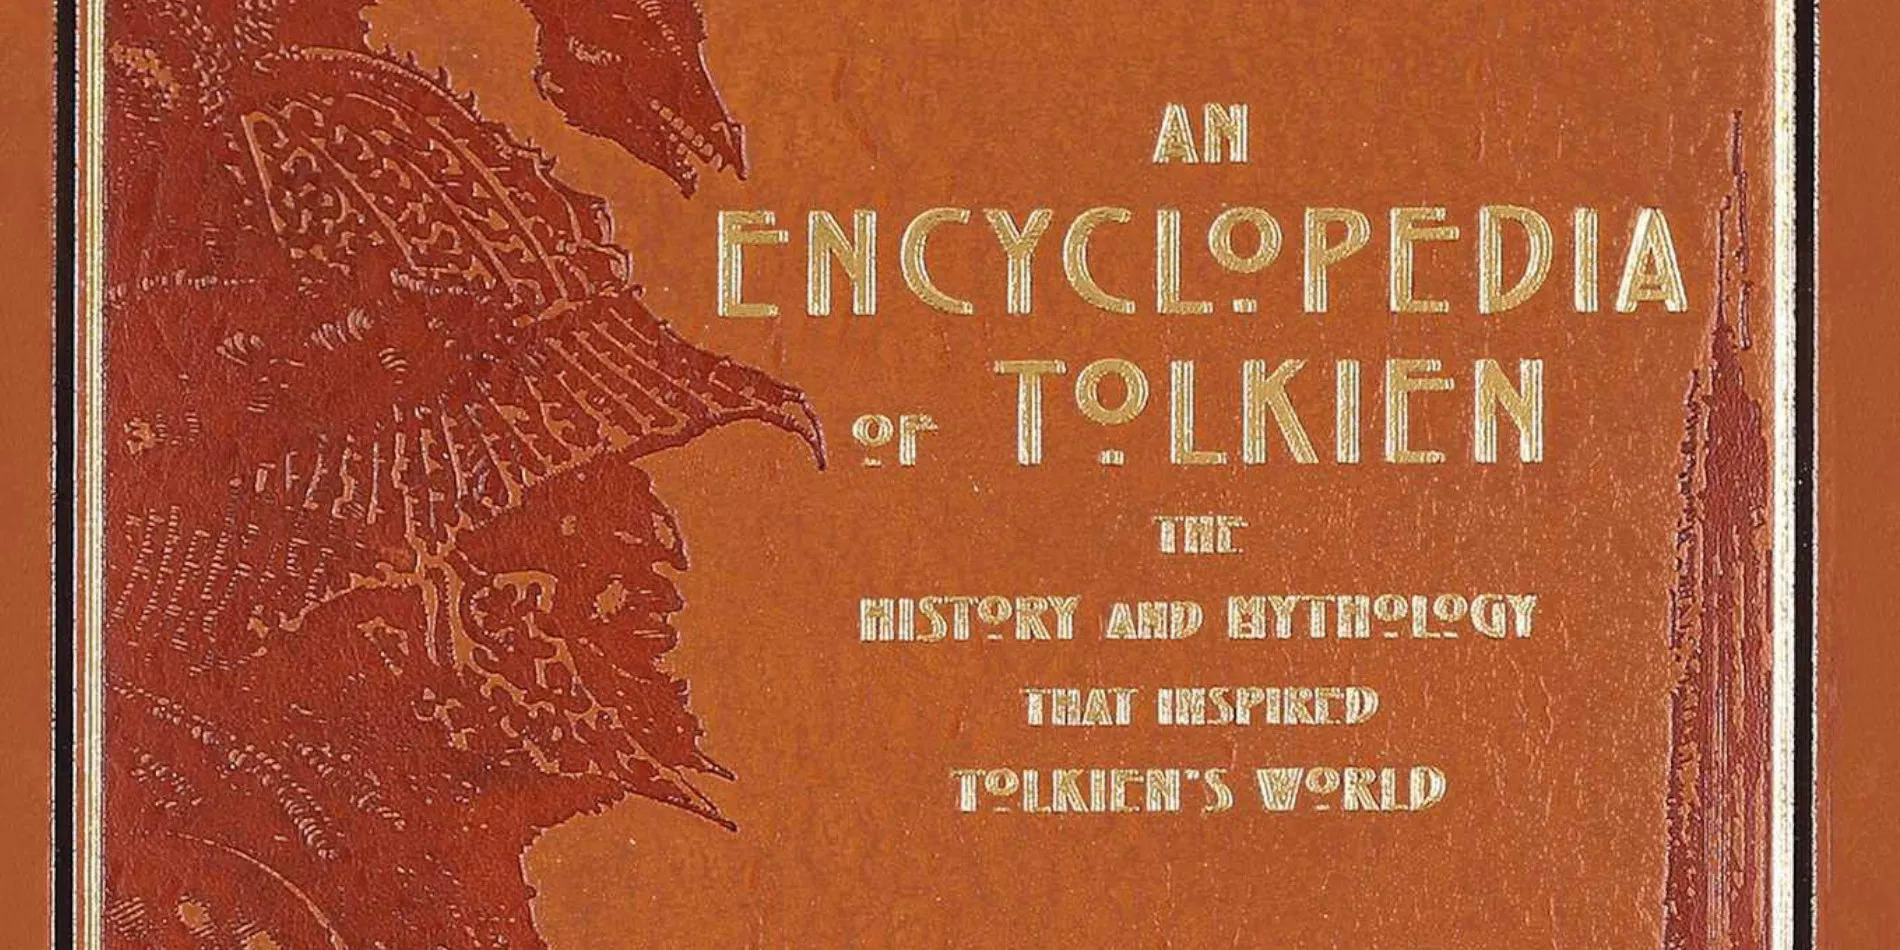 Lotr An Encyclopedia of Tolkien The History and Mythology That Inspired Tolkien’s World by David Day